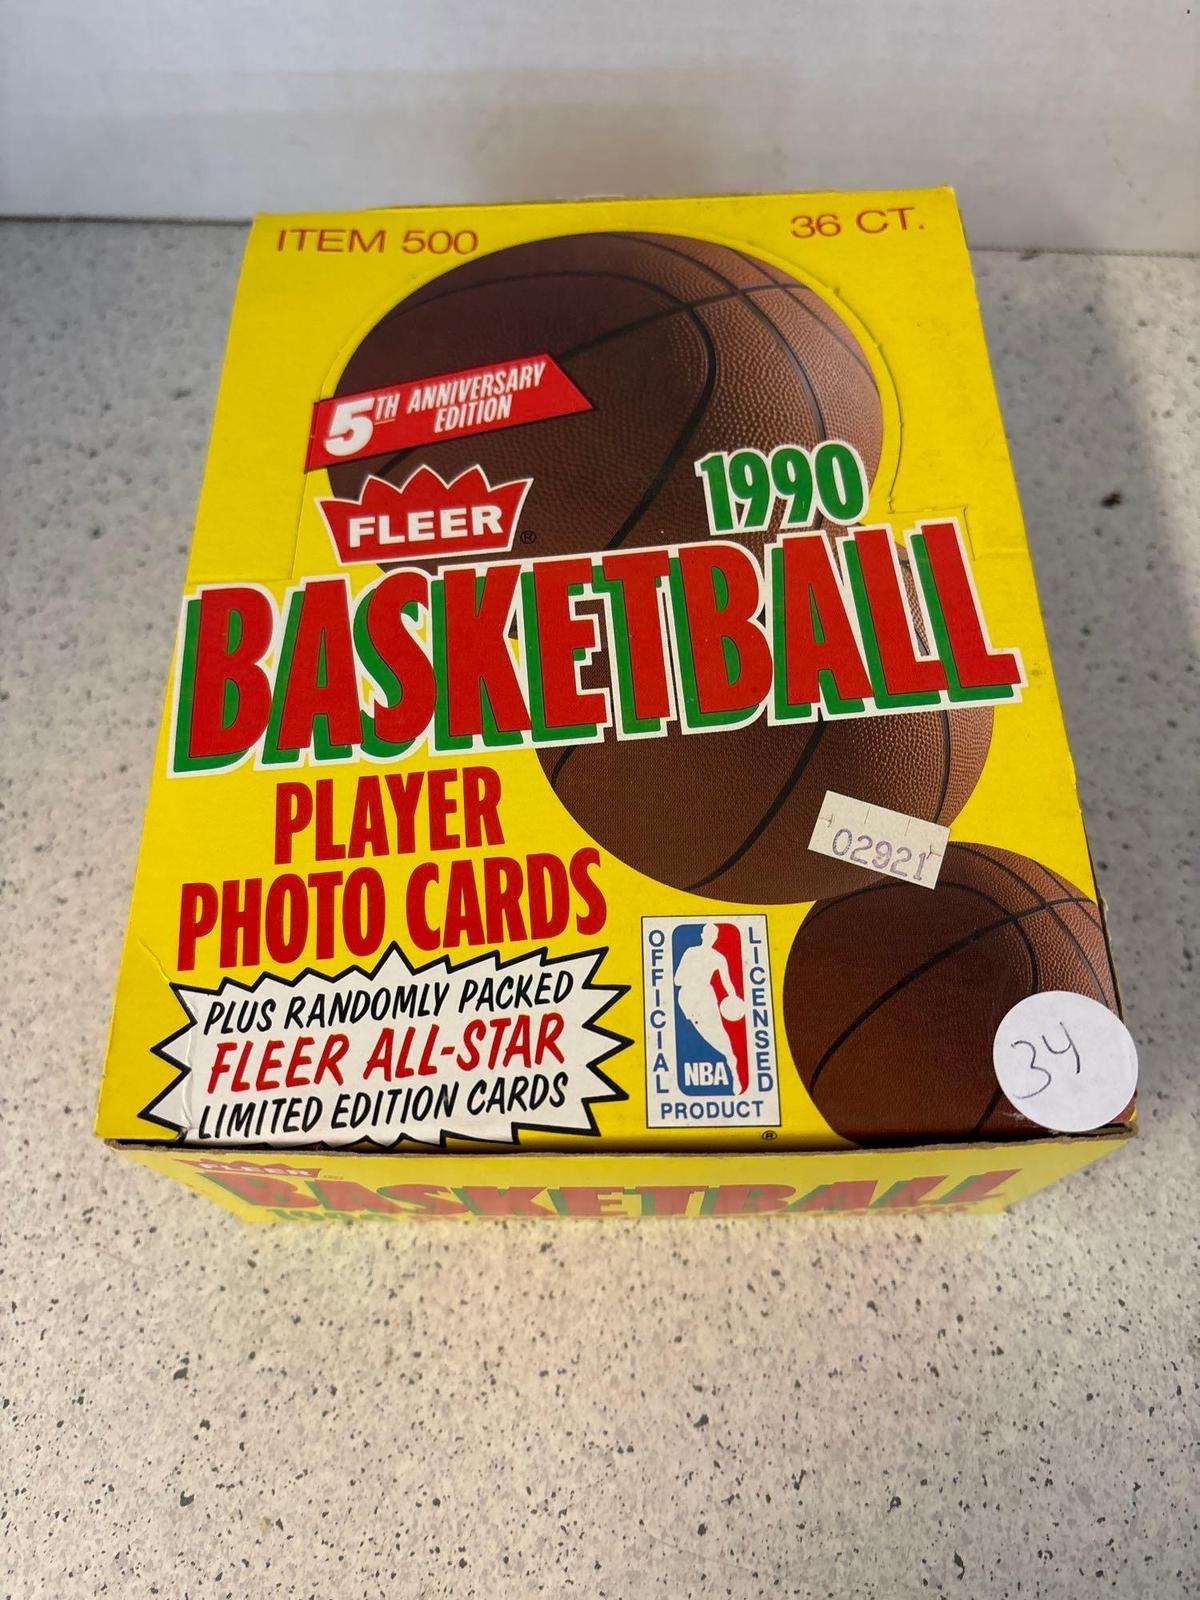 Fleer 1990 basketball player photo cards 36 count